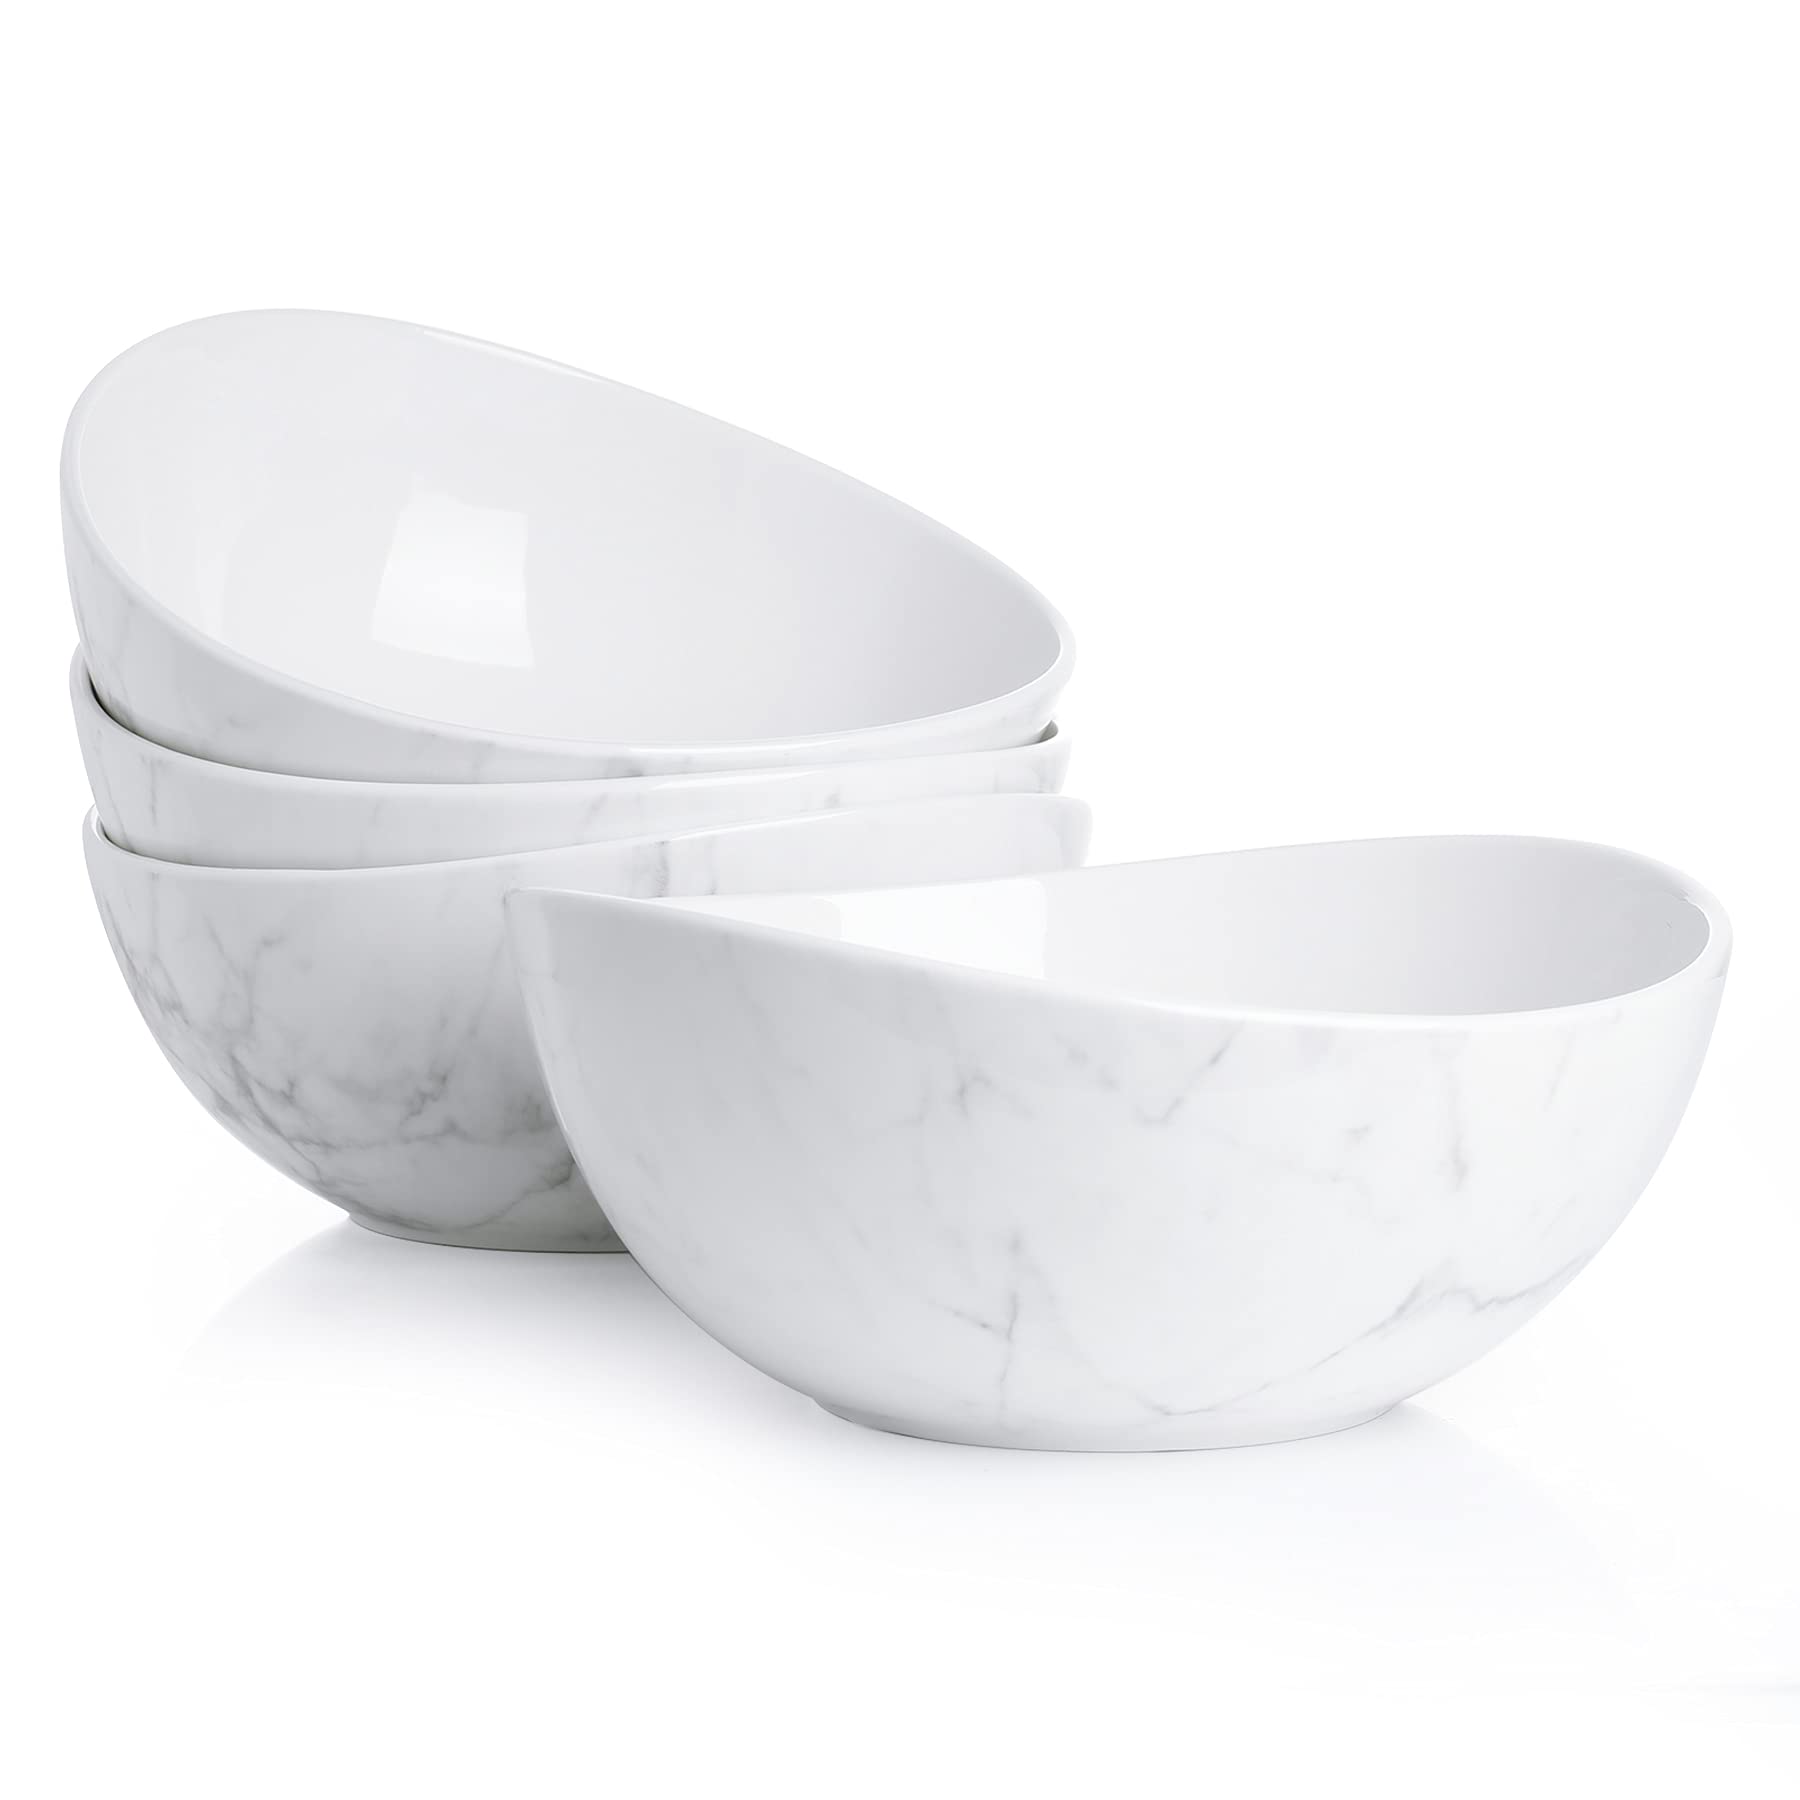 Sweese 104.499 Porcelain Bowls - 42 Ounce for Salad, Fruits and Popcorn - Set of 4, Marble Pattern